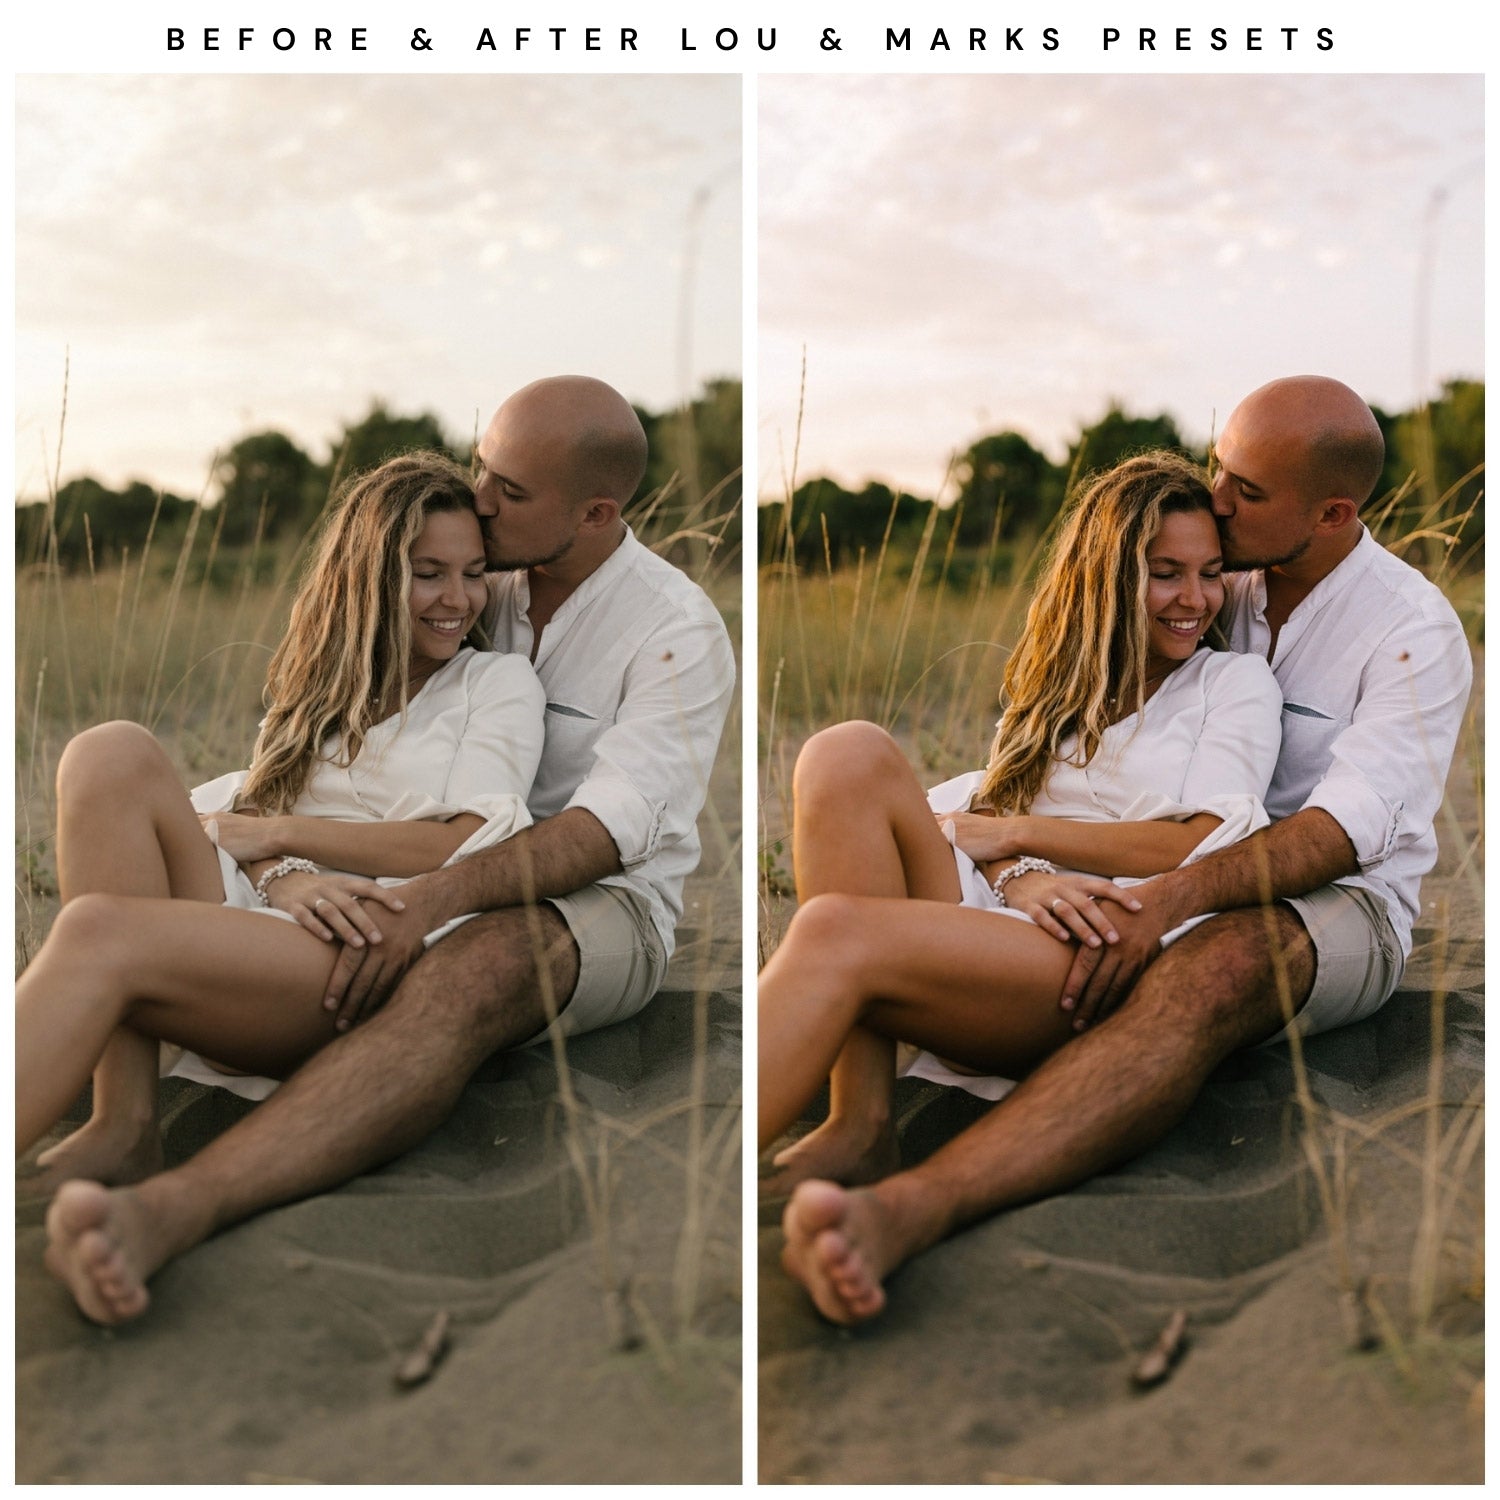 Lou And Marks Presets Moody Lightroom Presets Bundle The Best Moody Presets Couples